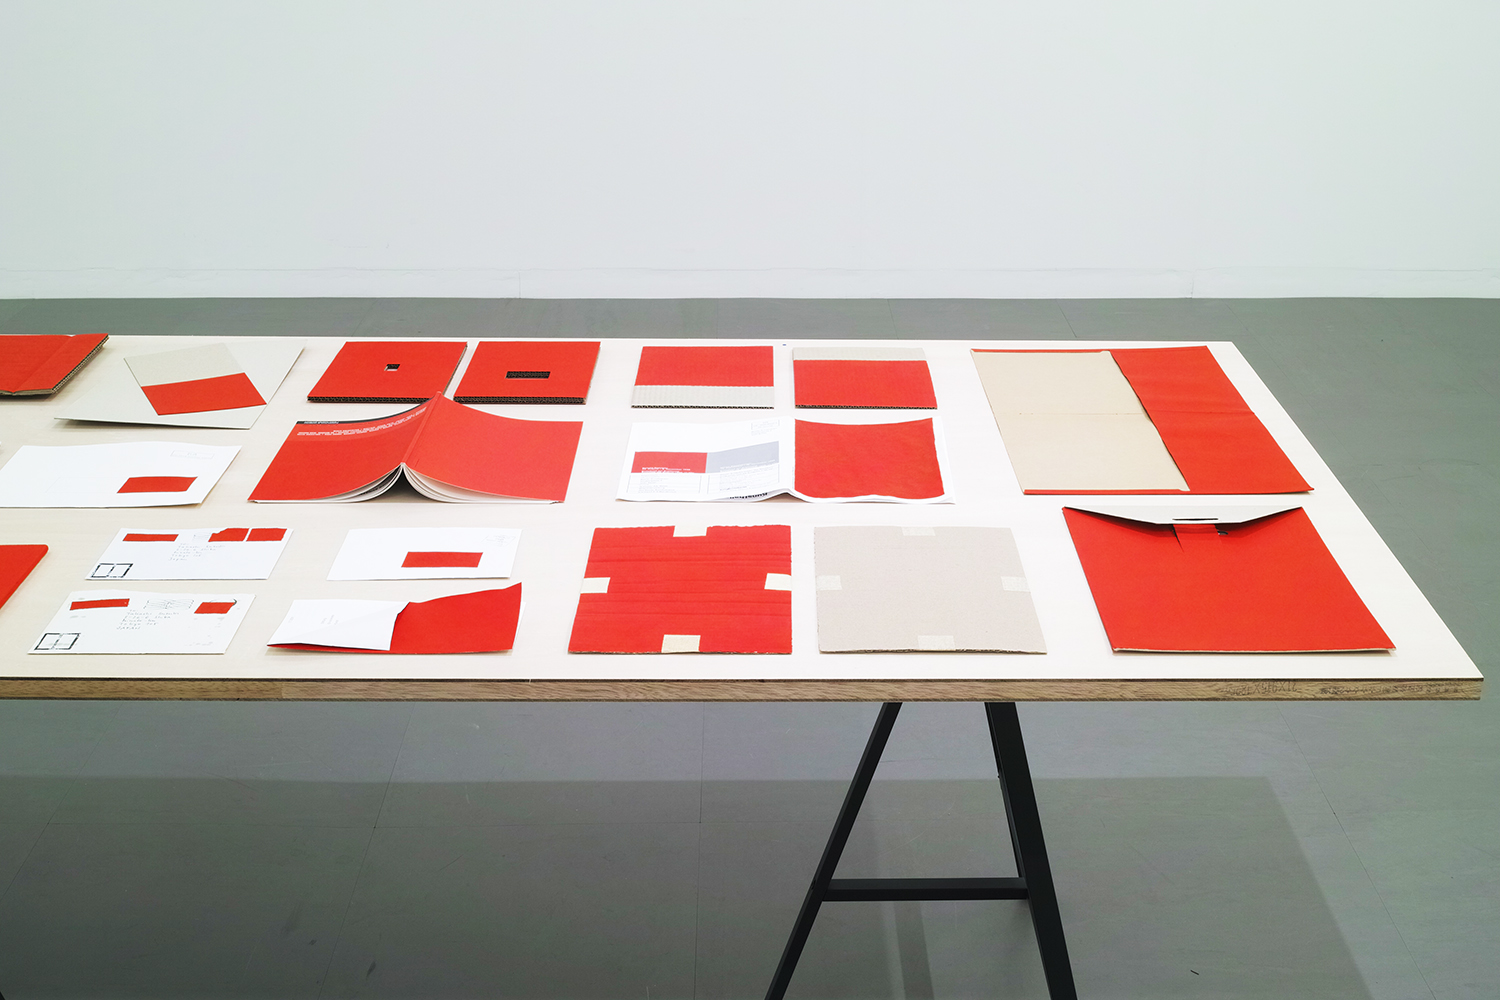 Installation view on table